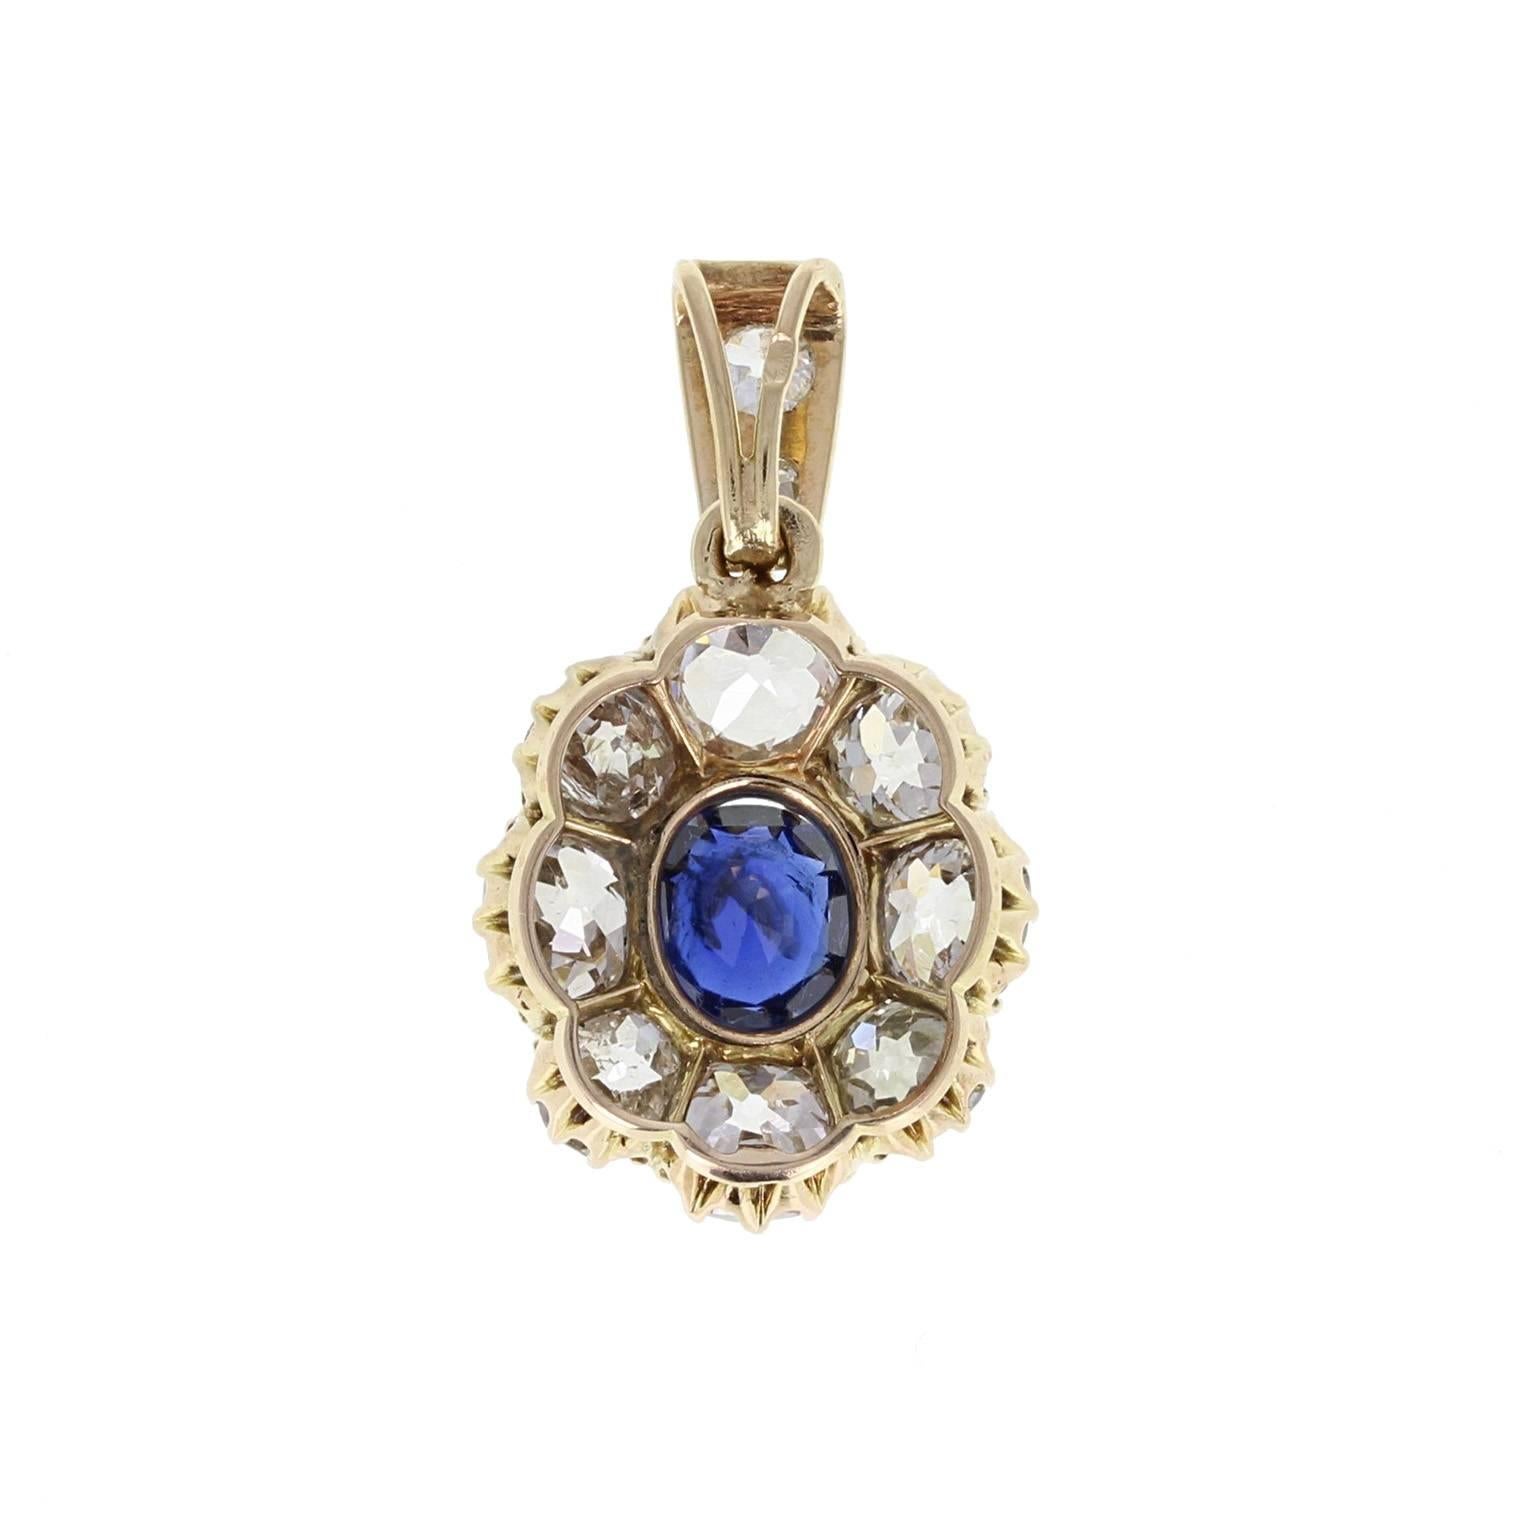 A fine and impressive antique pendant from early 1900s. A central cushion-cut blue sapphire of velvety, deep blue, sits in eight claws, surrounded generously by eight cushion-cut, bright and lively diamonds to form an oval cluster shape. Suspended